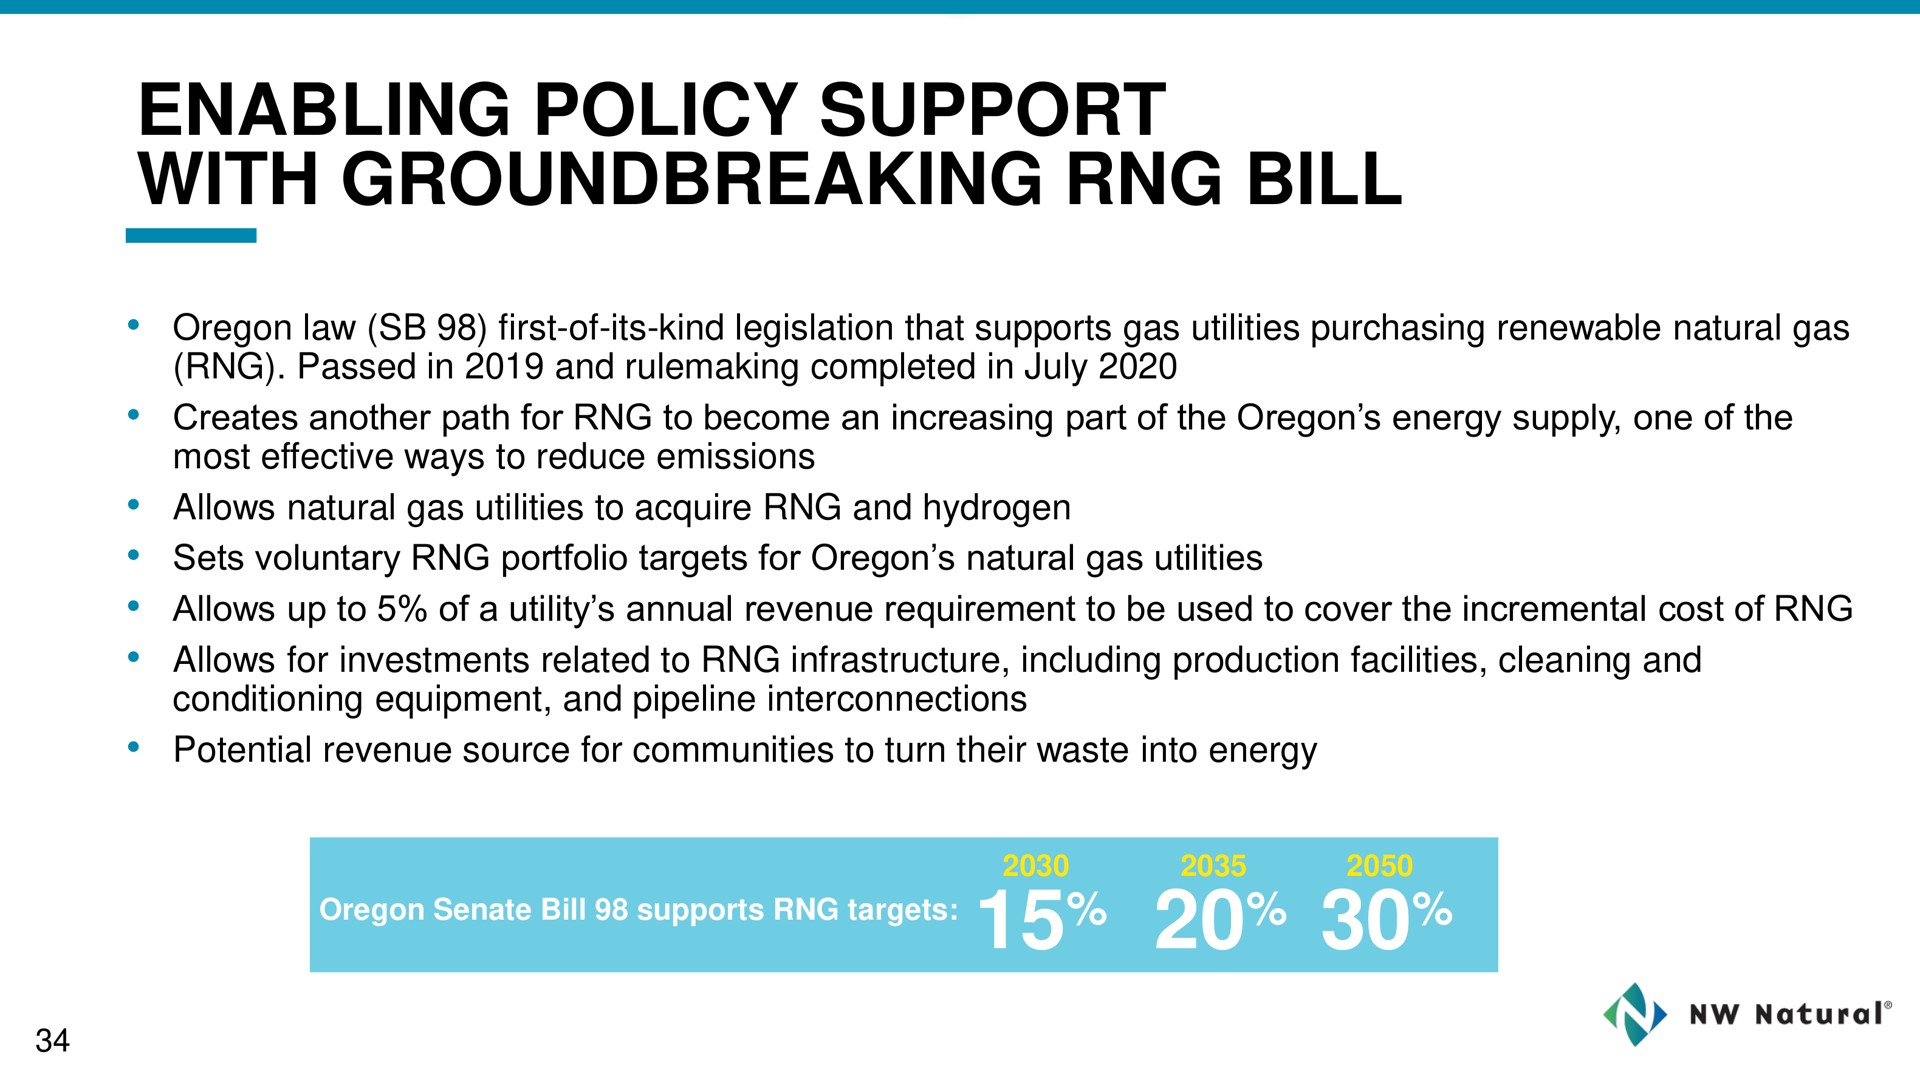 enabling policy support with bill | NW Natural Holdings